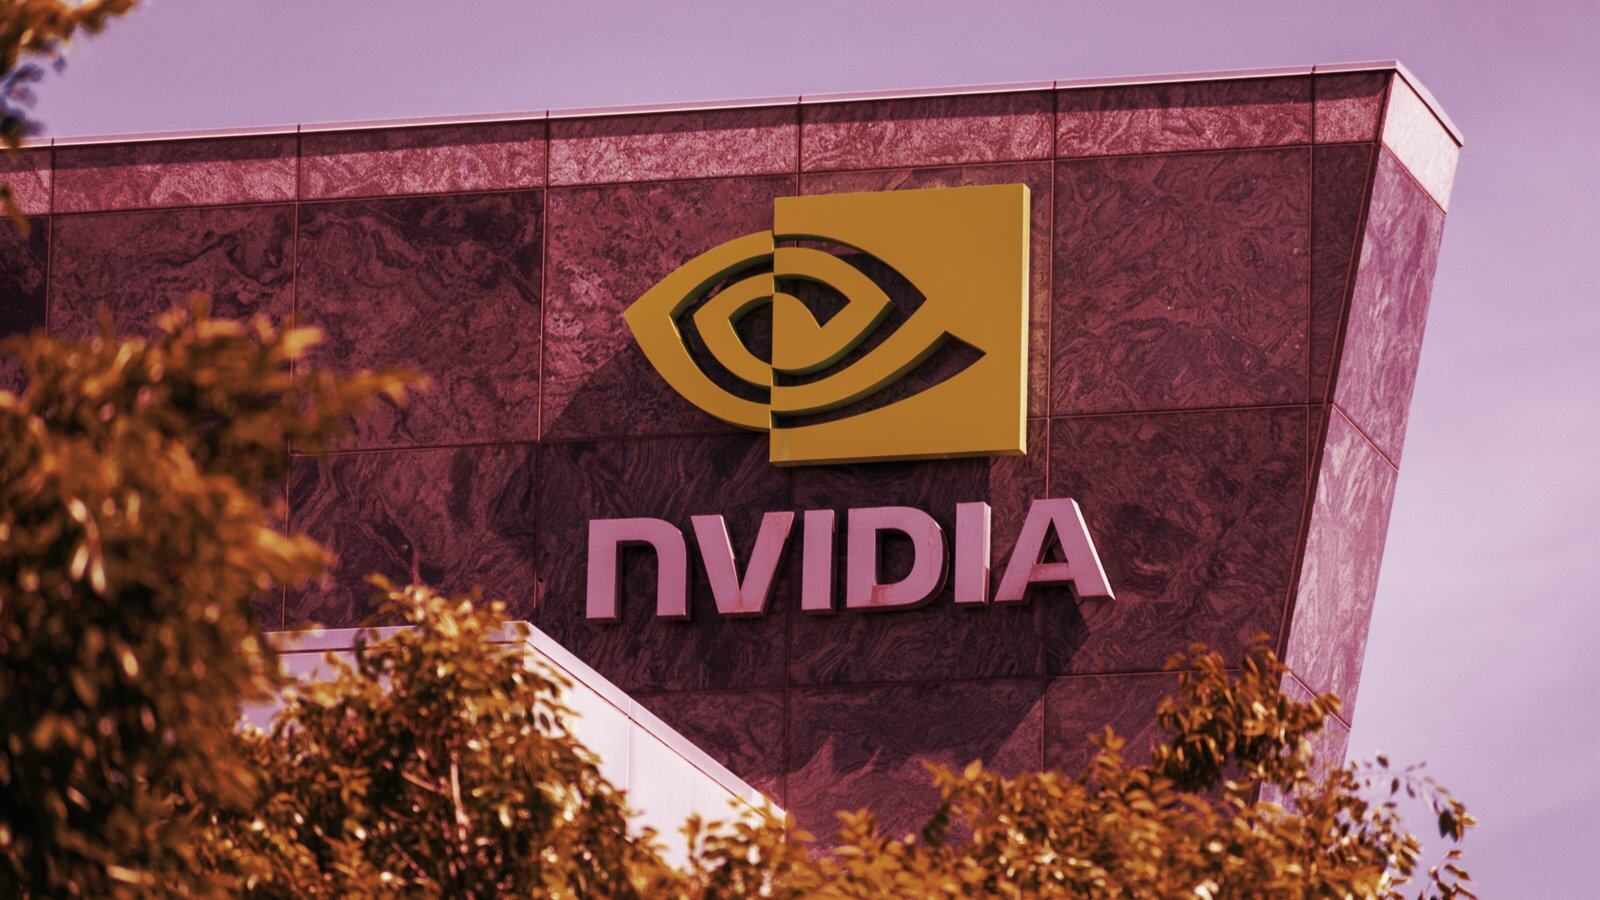 Nvidia Says Crypto Adds Nothing to Society, Despite Profiting From Mining